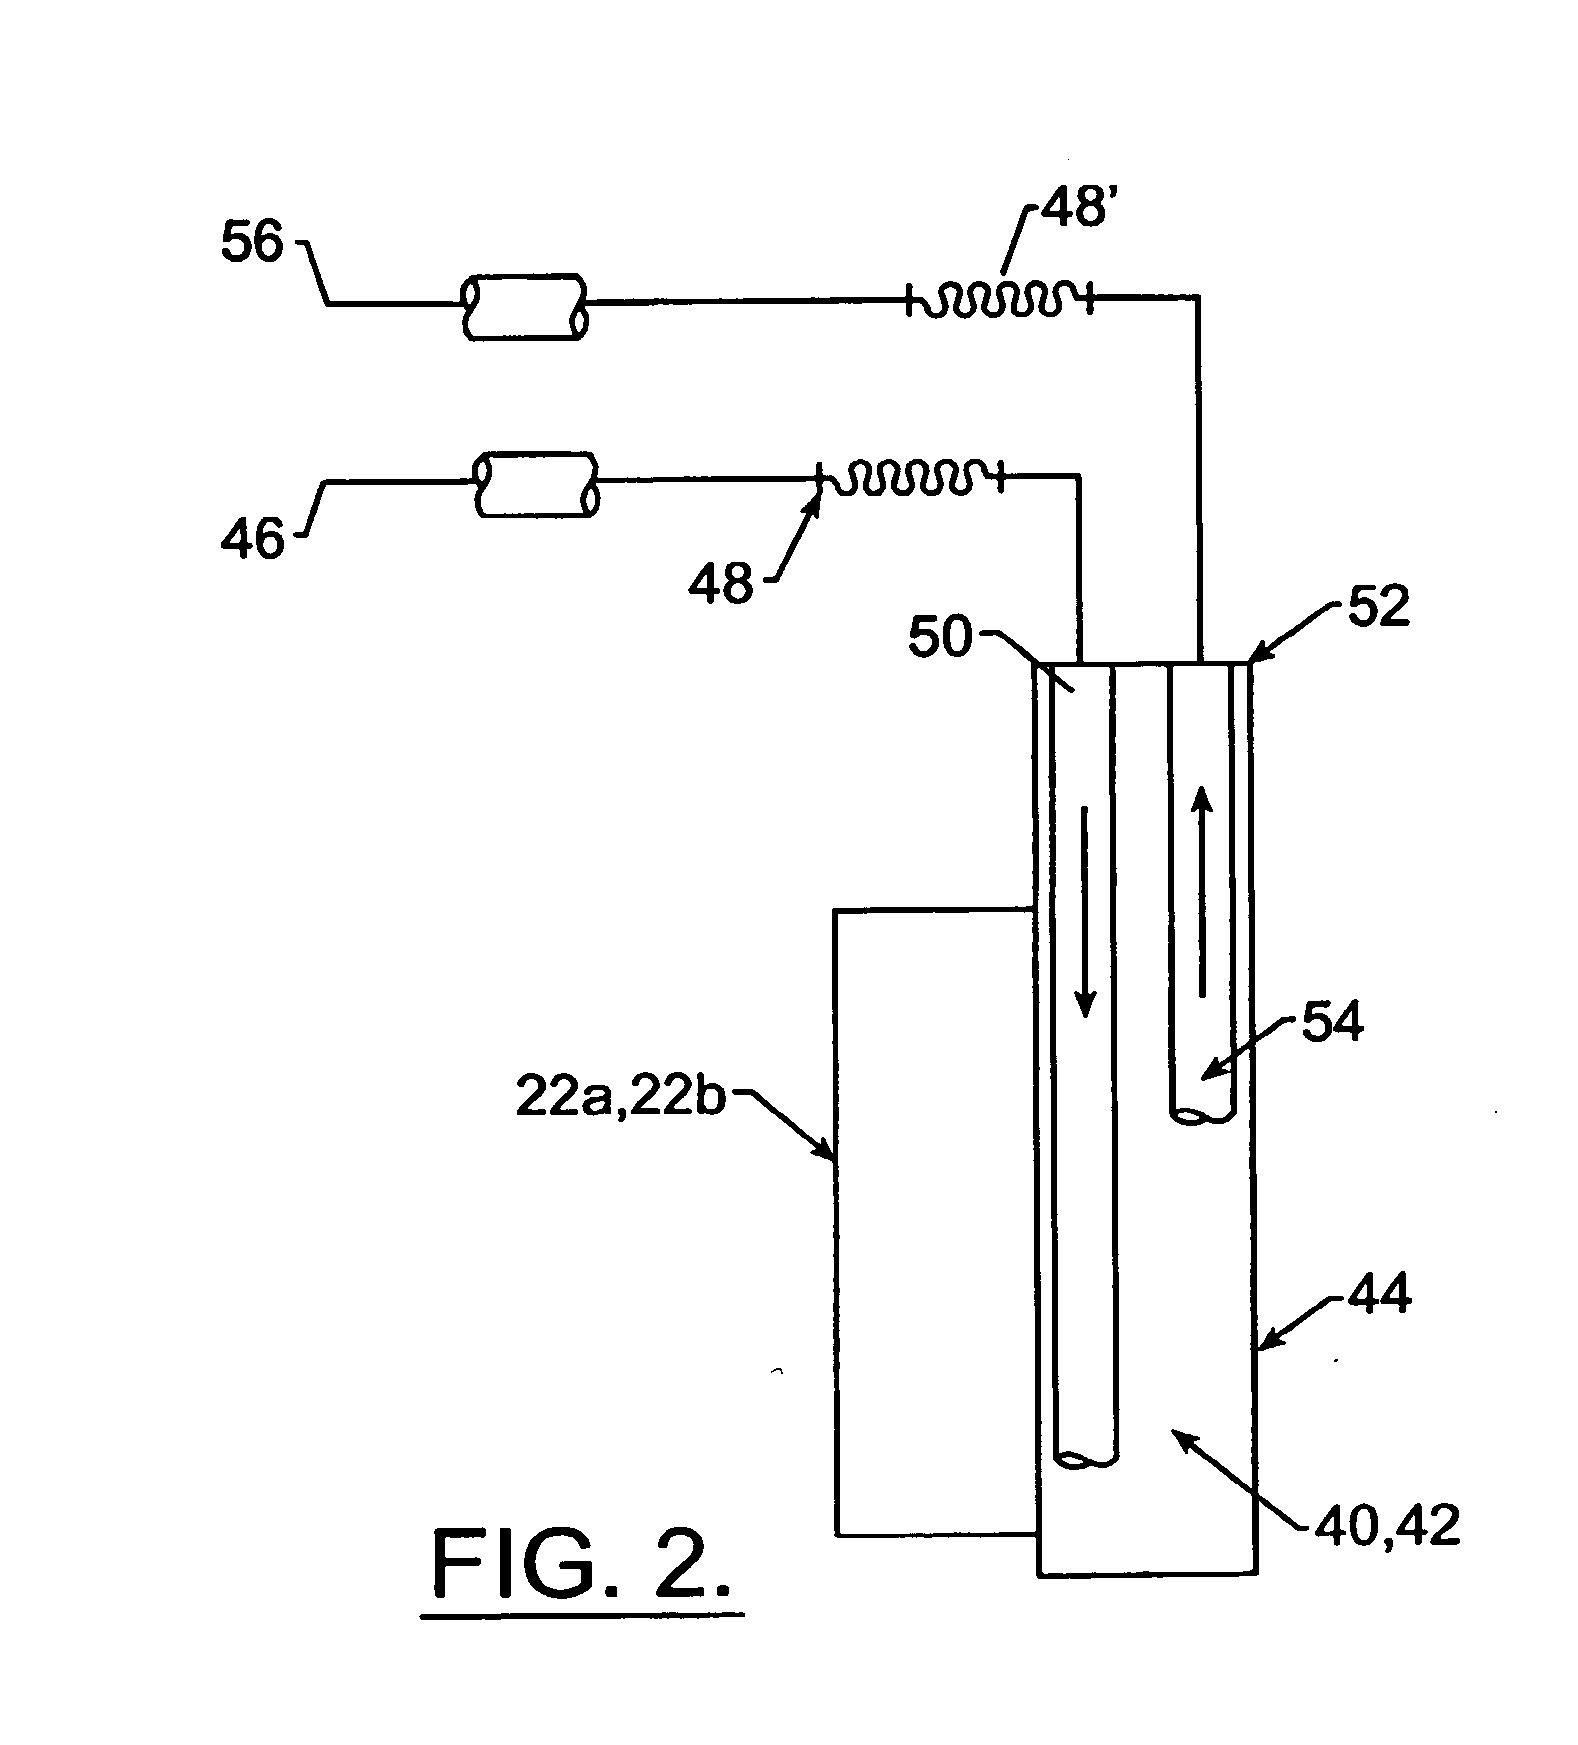 Method and apparatus to stress test medicament inhalation aerosol device by inductive heating